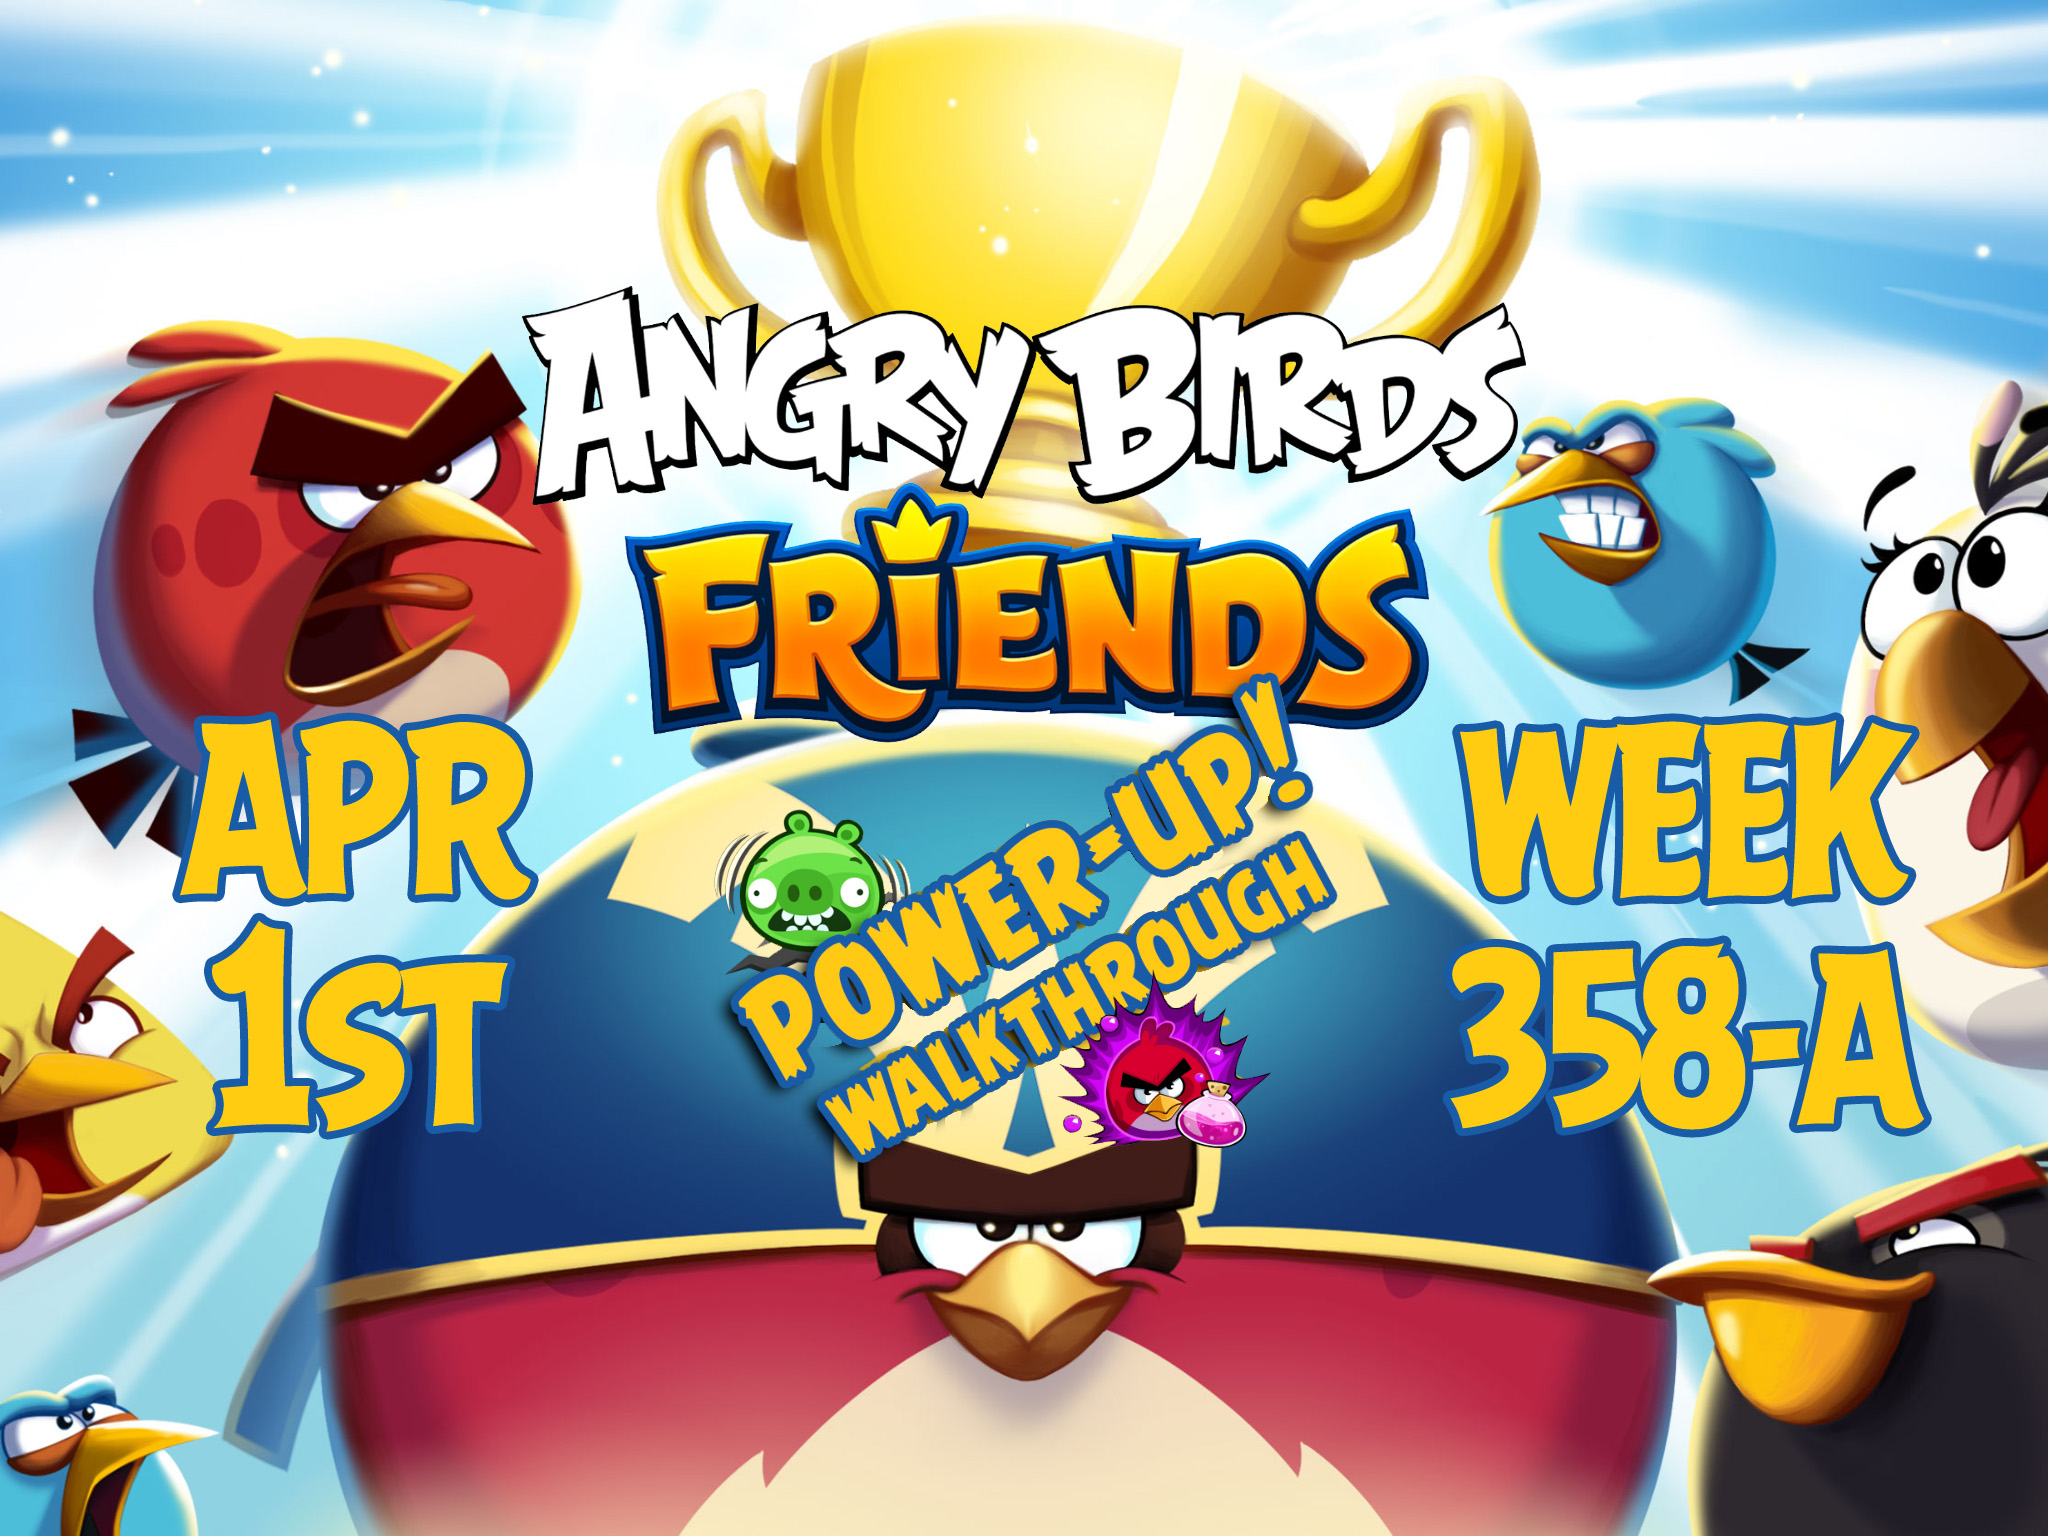 Angry-Birds-Friends-Tournament-Week-358-A-Feature-Image-PU